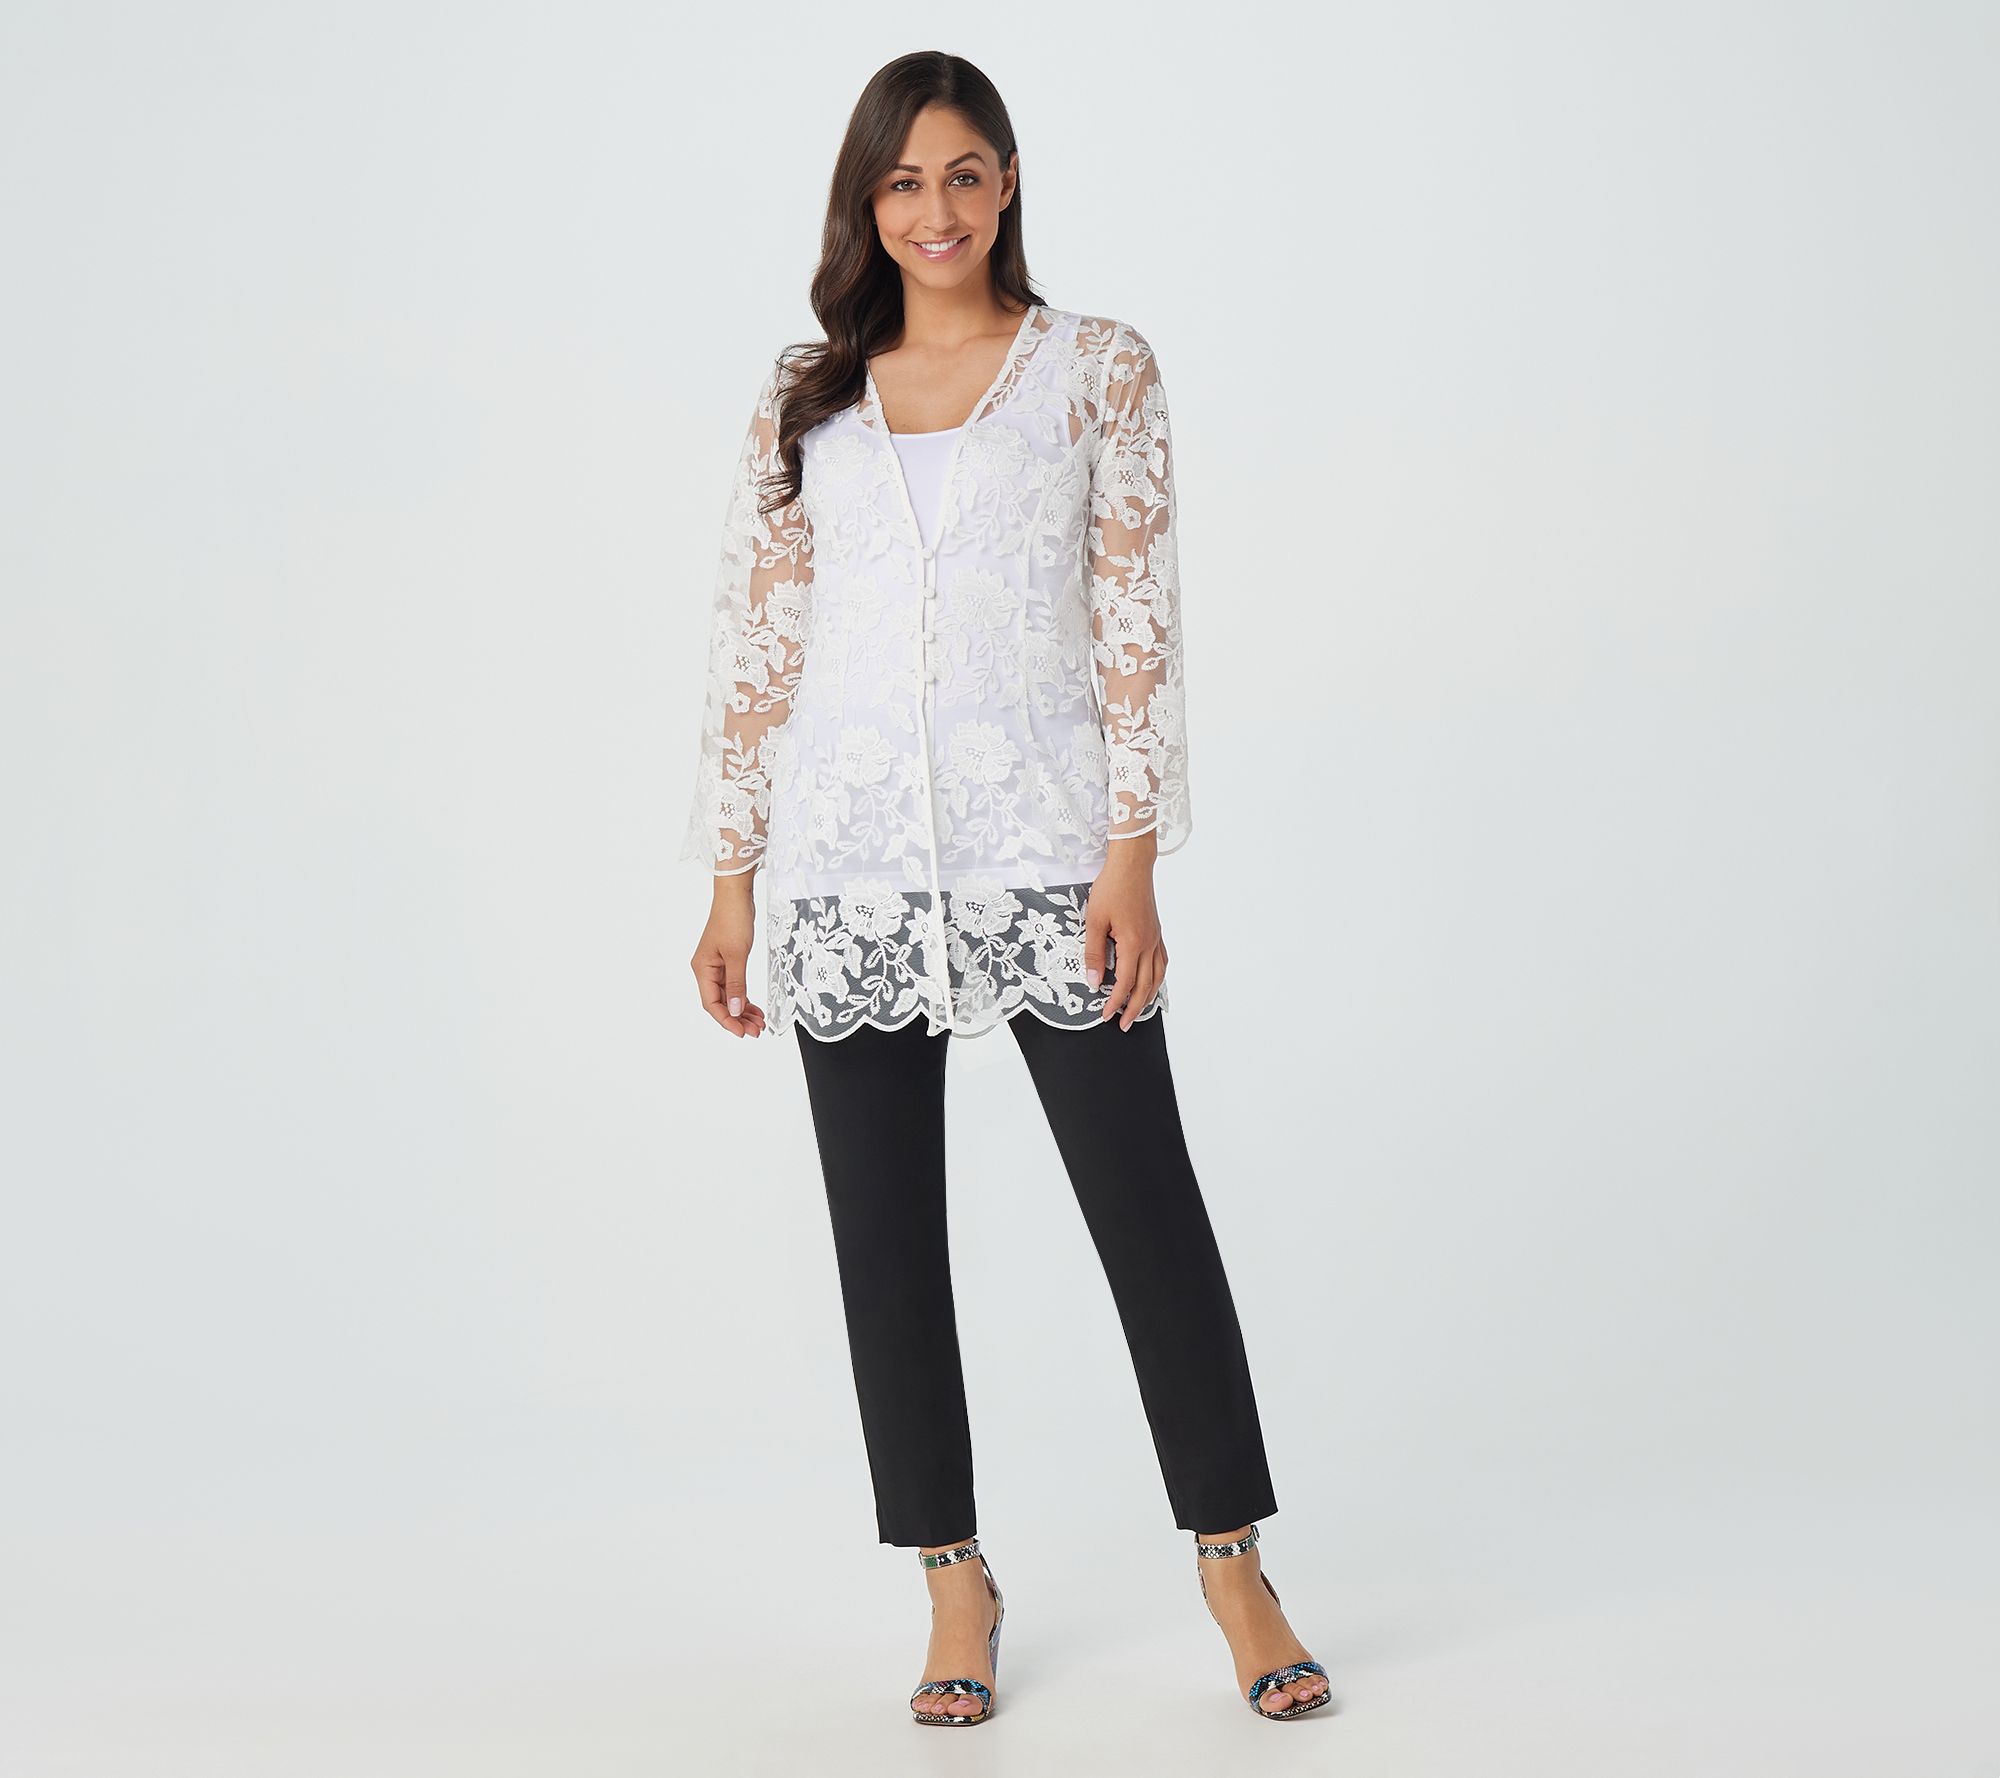 Linea by Louis Dell'Olio Embroidered Lace Jacket - QVC.com